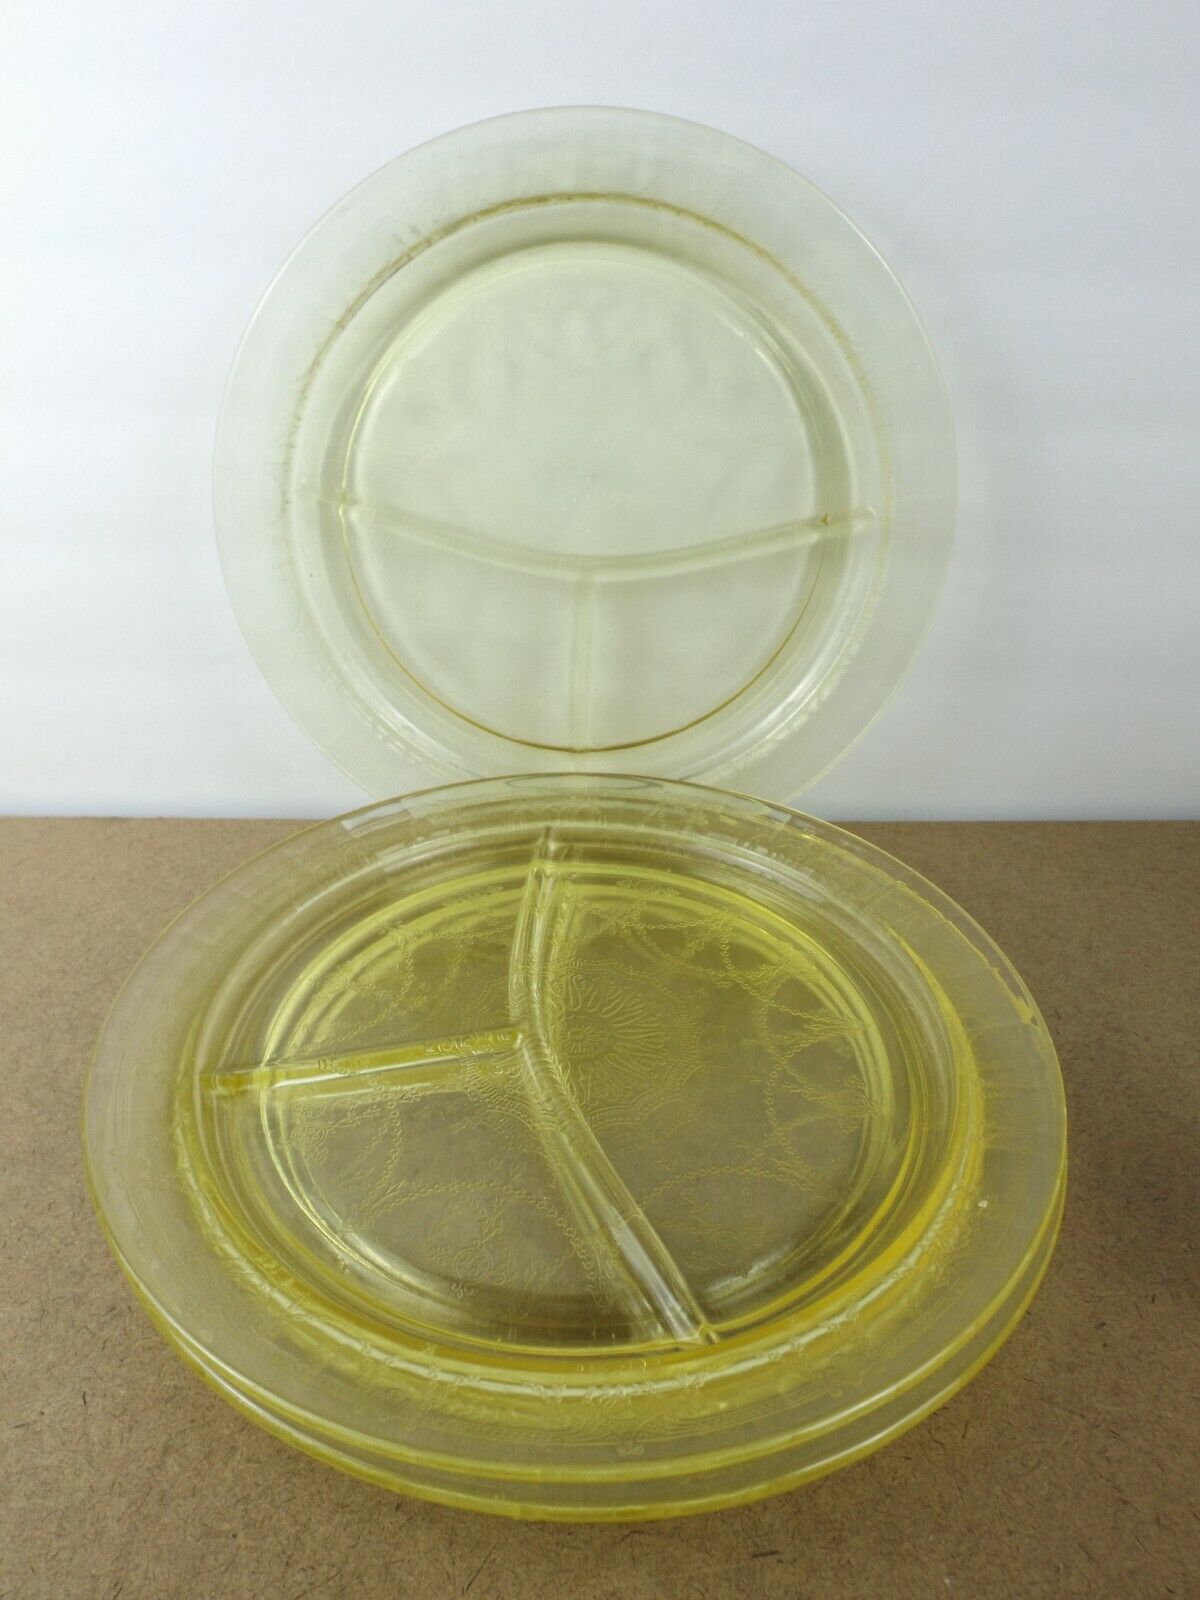 4 Anchor Hocking Yellow Cameo Ballerina Grill Plates Depression Glass  (it#a5)